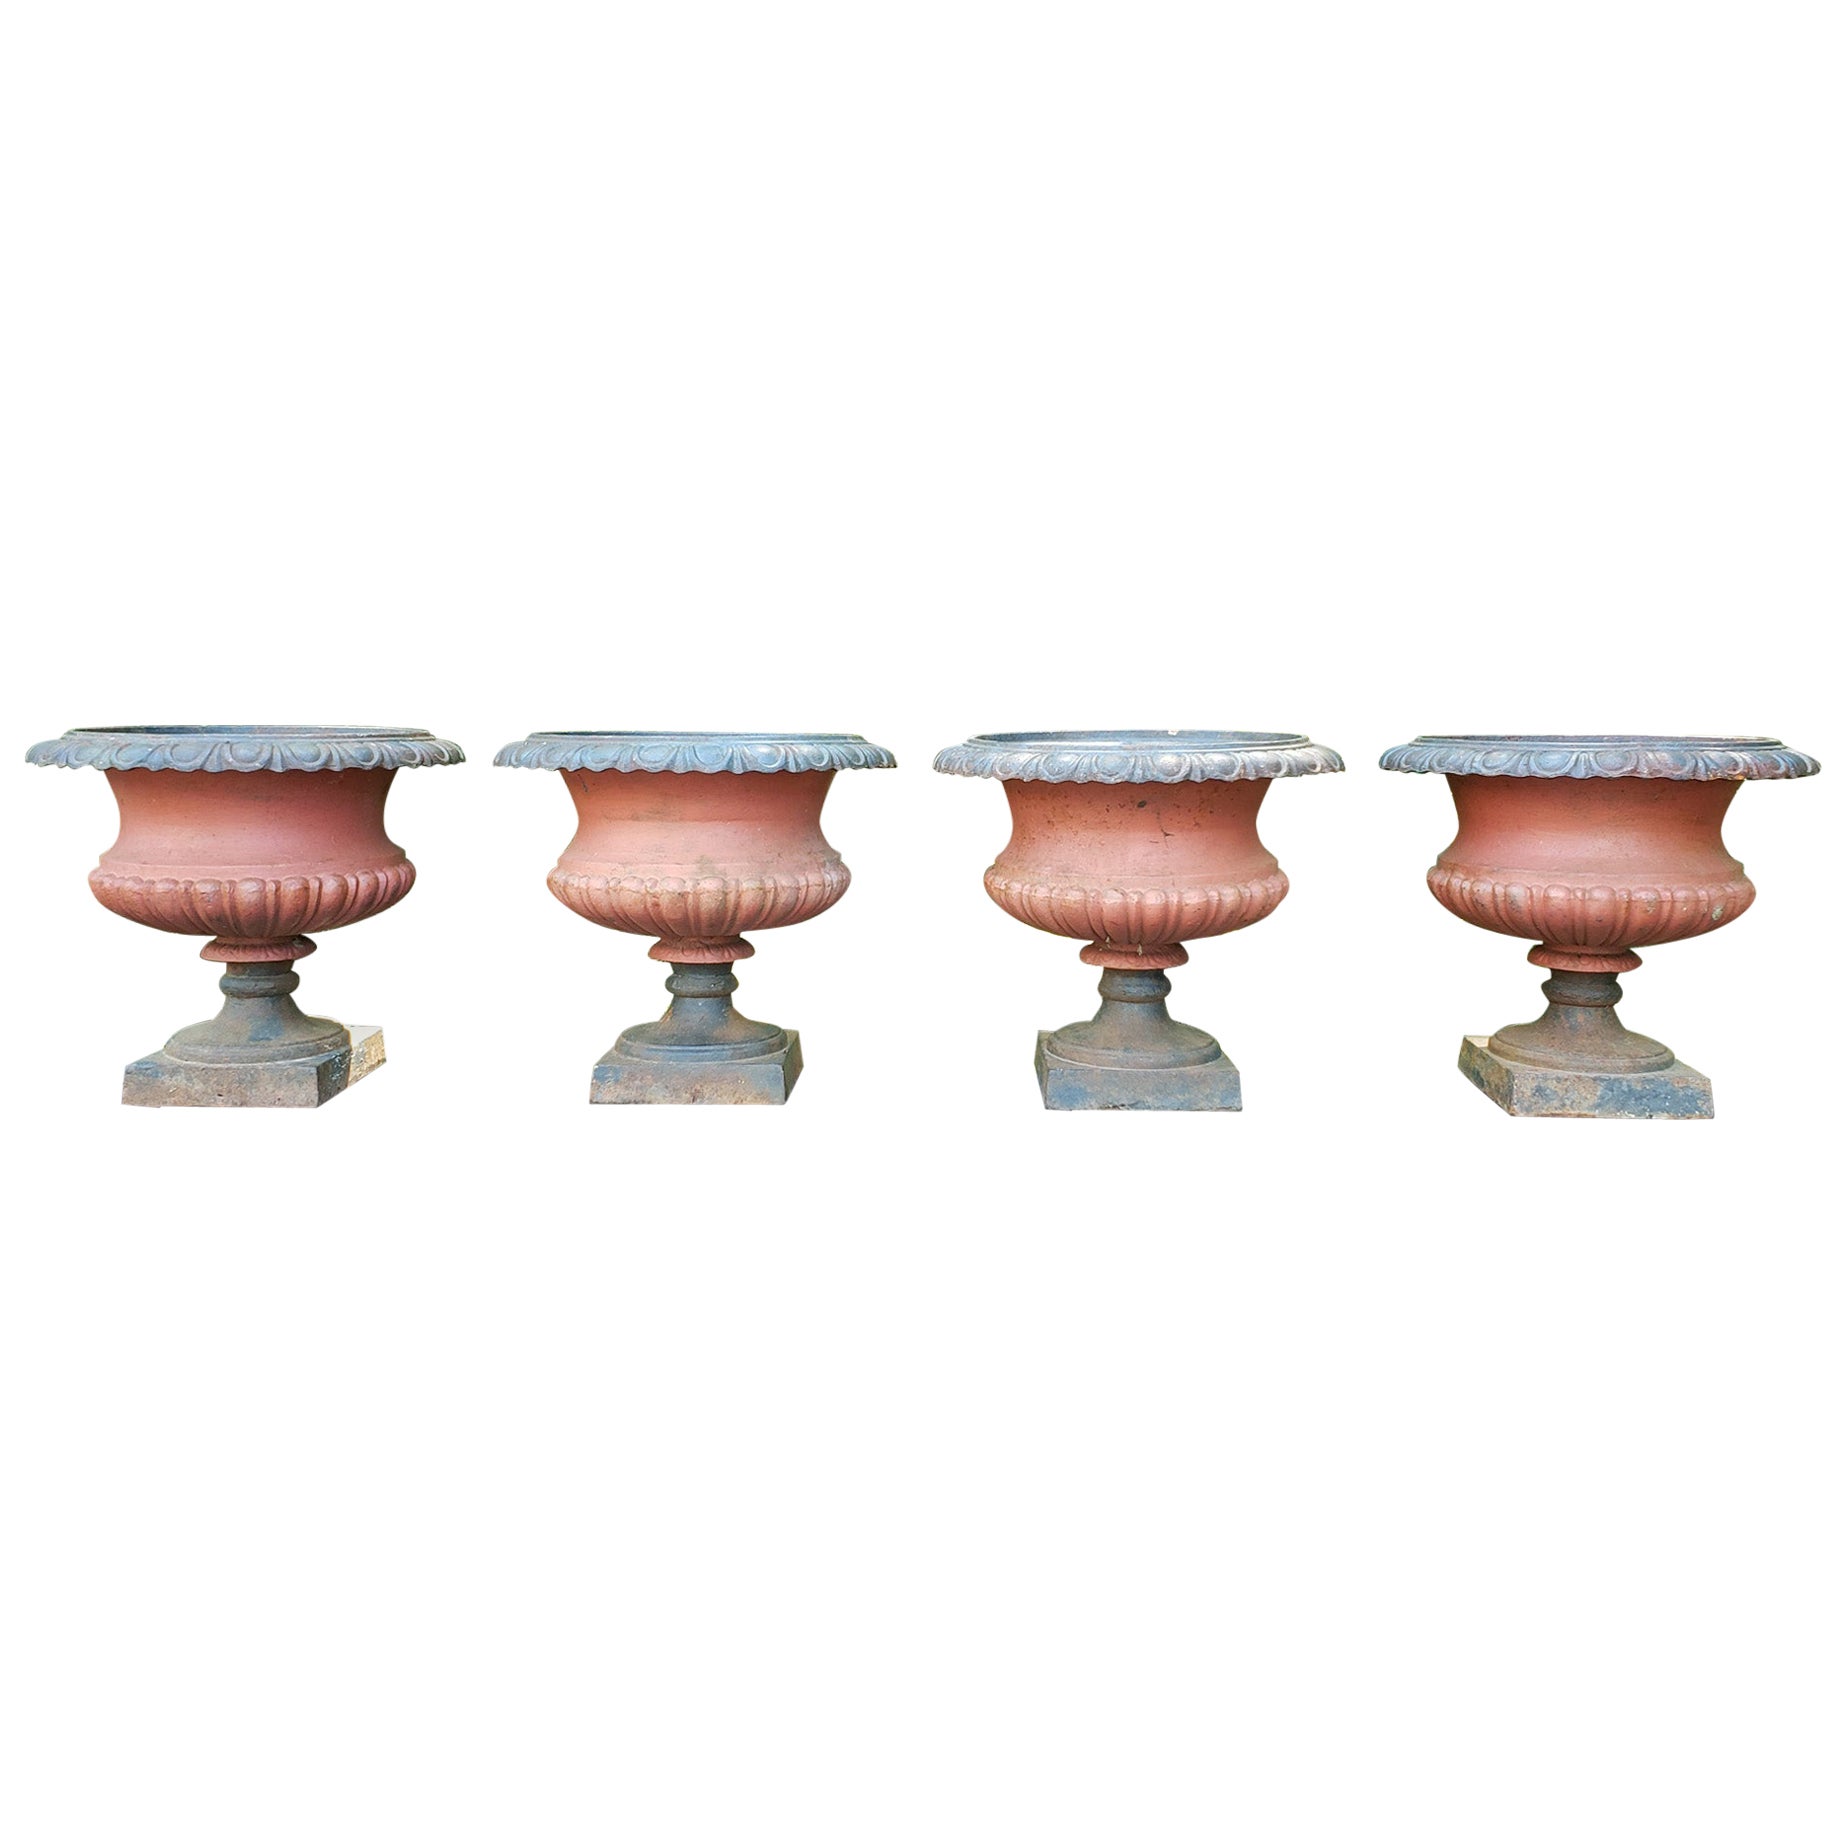 American Garden Flower or Plant Urns-Set of Four